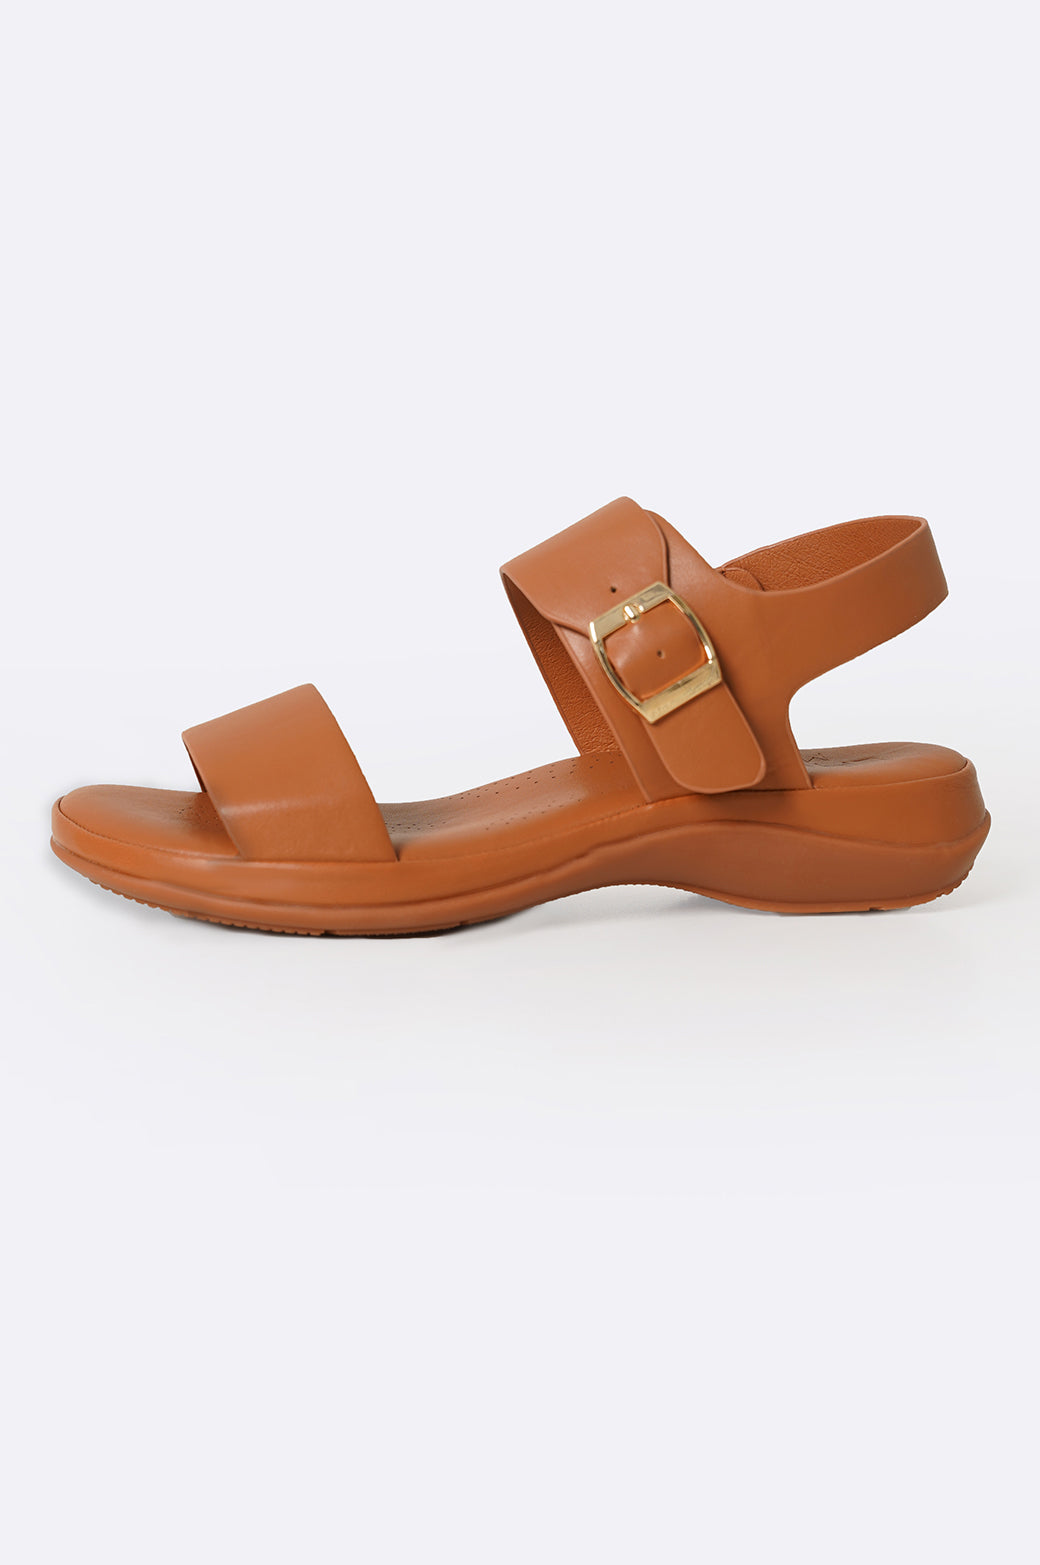 TAN BUCKLED MAMA SANDALS